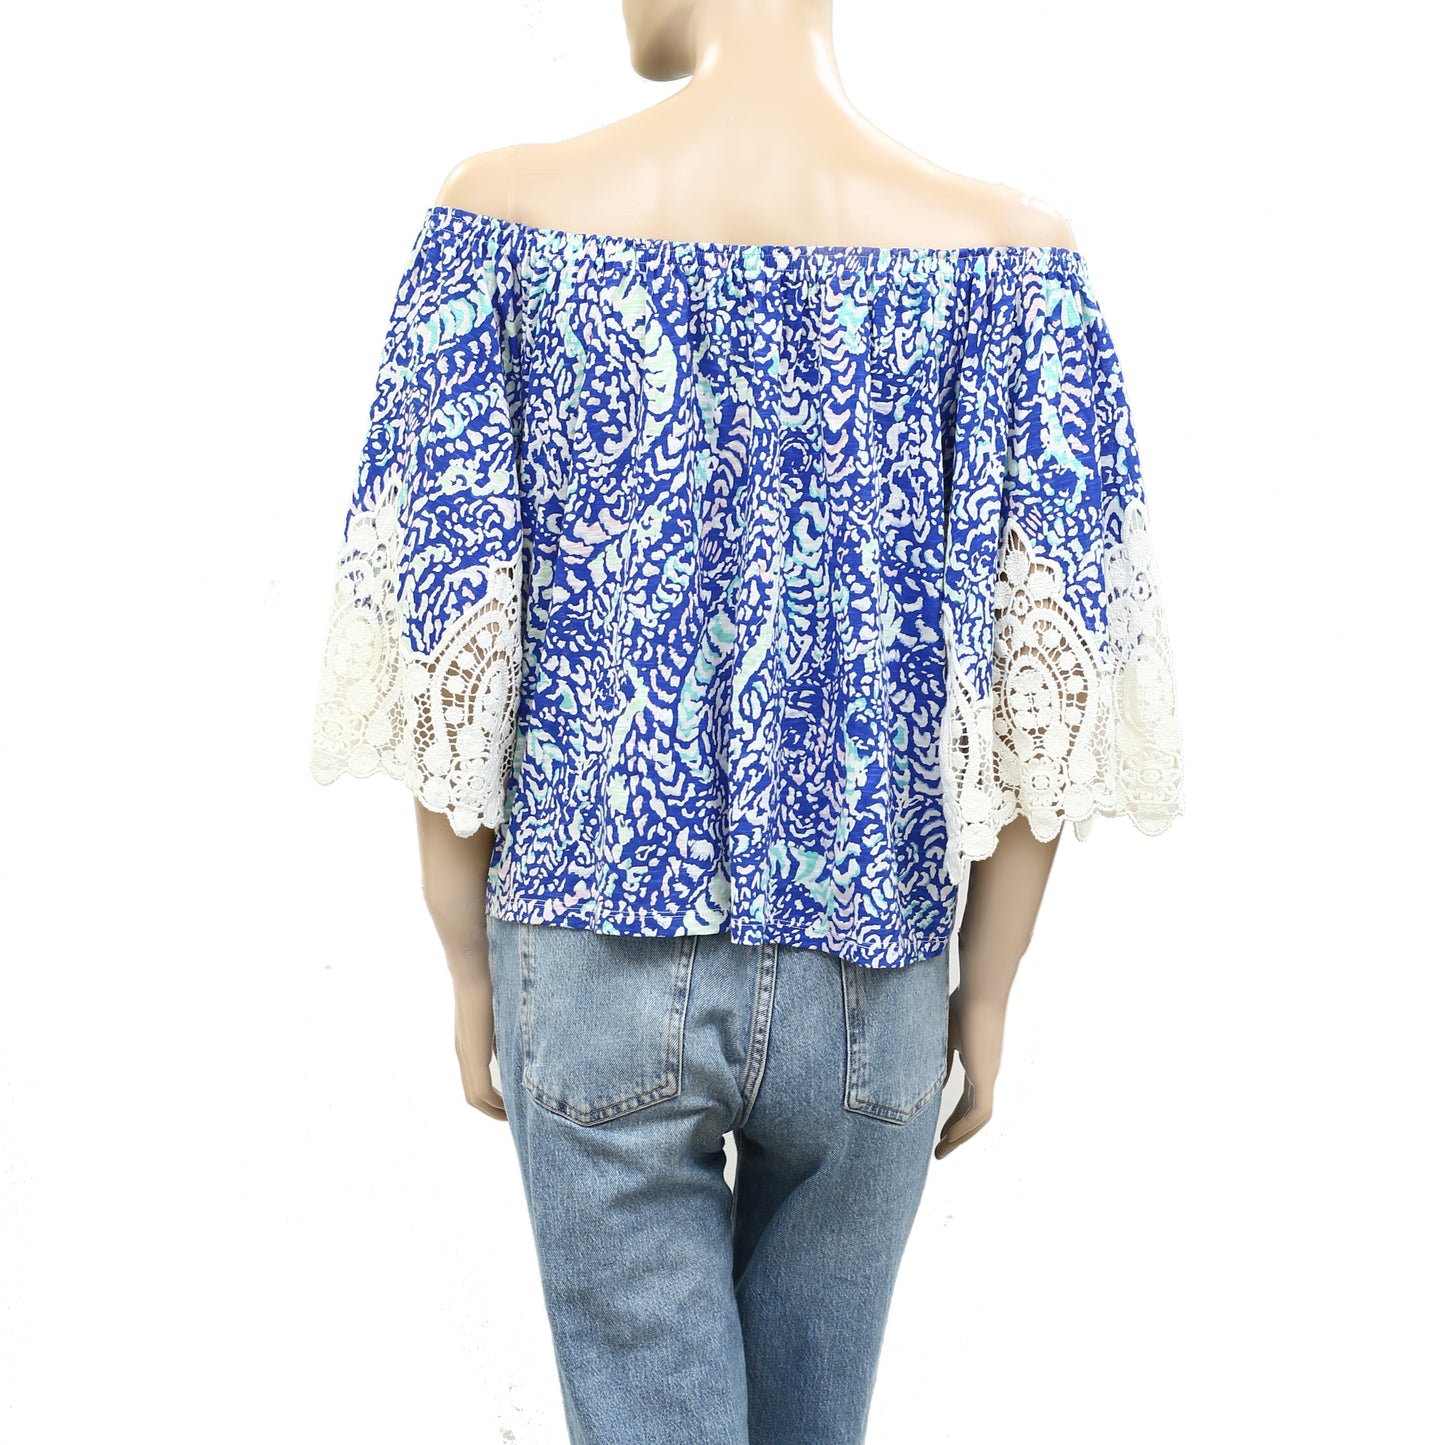 Lilly Pulitzer Zaylee off the Shoulder Blouse Top